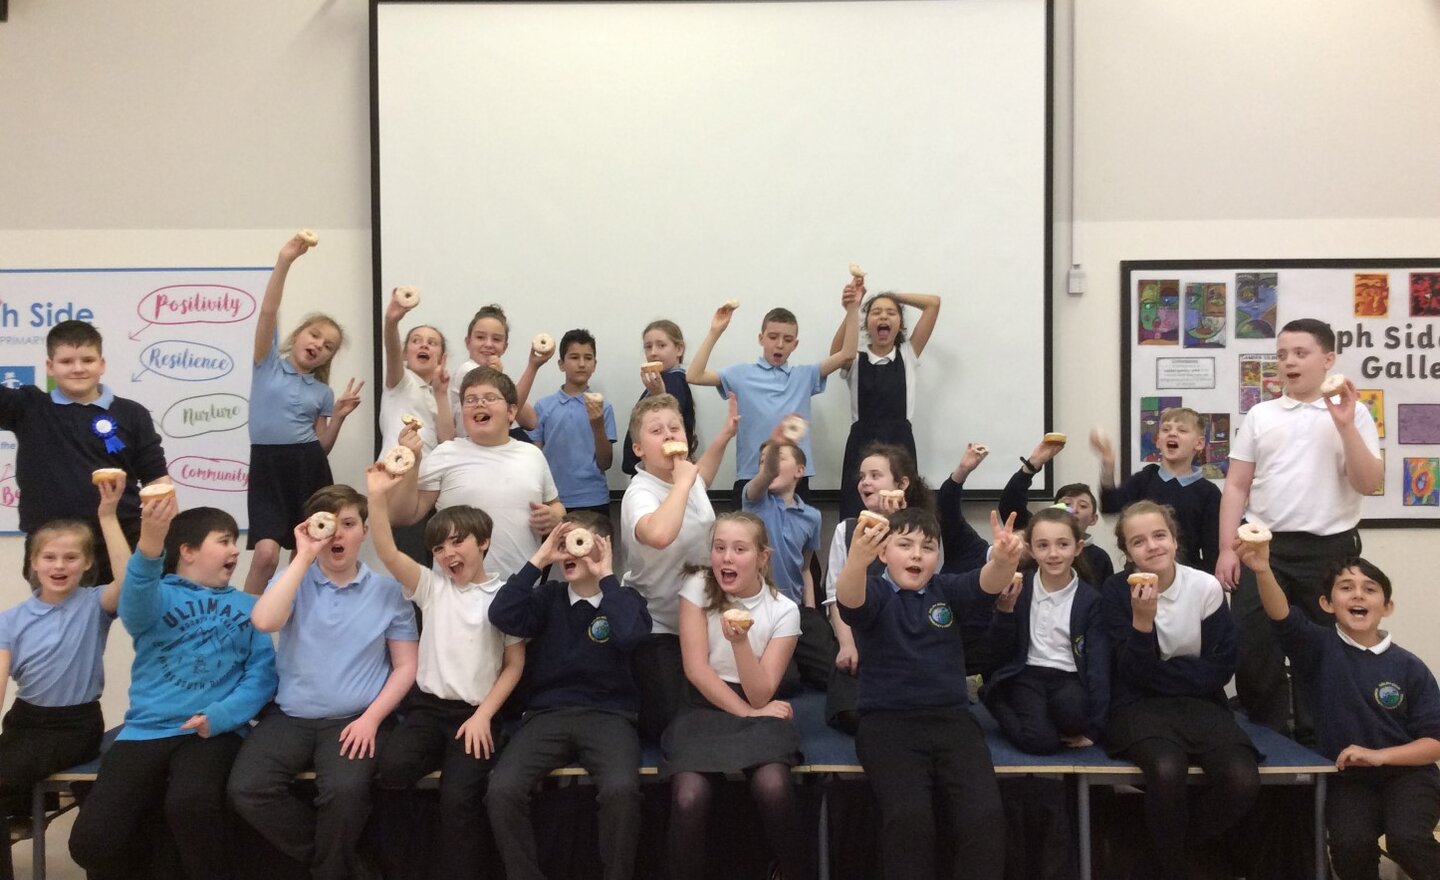 Image of Y6 rounded off a rather busy day with a donut, courtesy of Thomas for his birthday! Happy Birthday! #Evolve